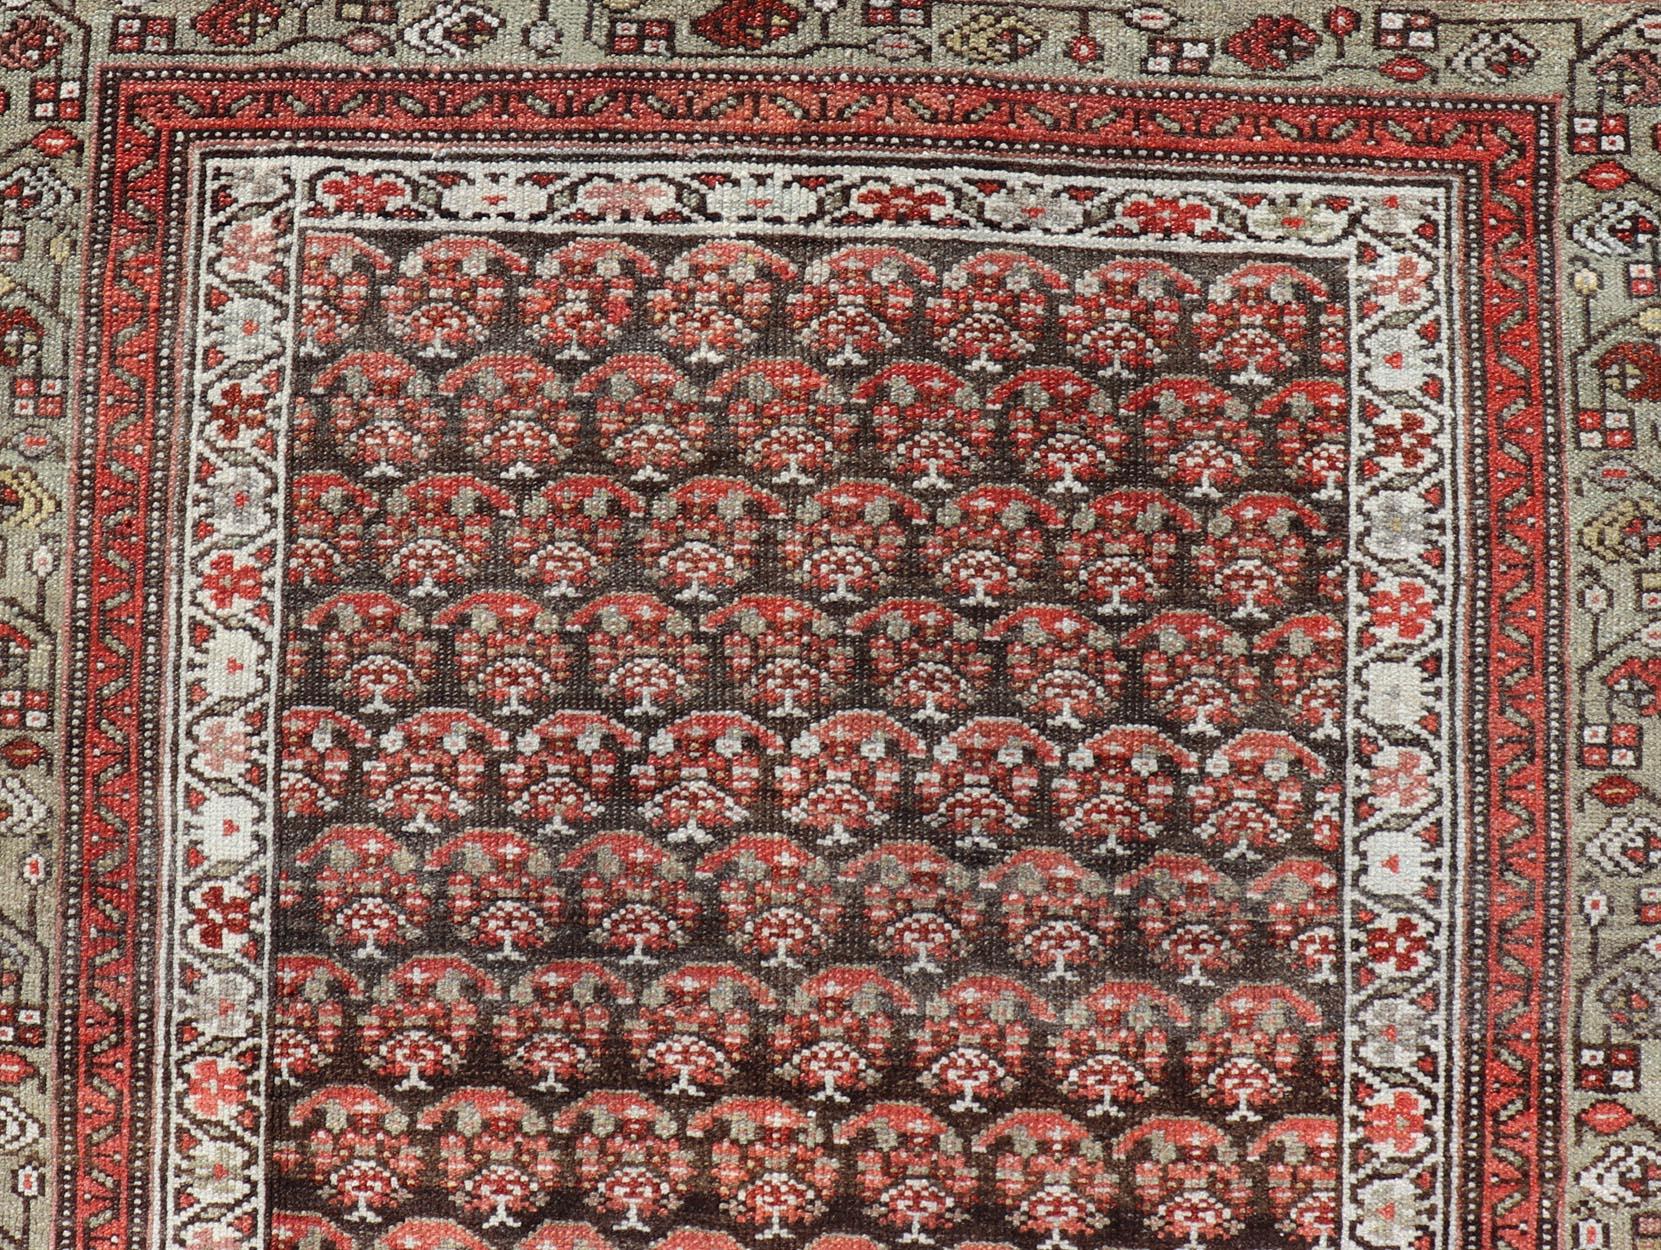 Antique Kurdish Gallery Runner with All-Over Paisley Design in Brown, Red, Green. Keivan Woven Arts / rug EMB-22230-15466, country of origin / type: Iran / Kurdish, circa 1920.
Measures: 4'3 x 10'1 
This Kurdish gallery runner from early 20th